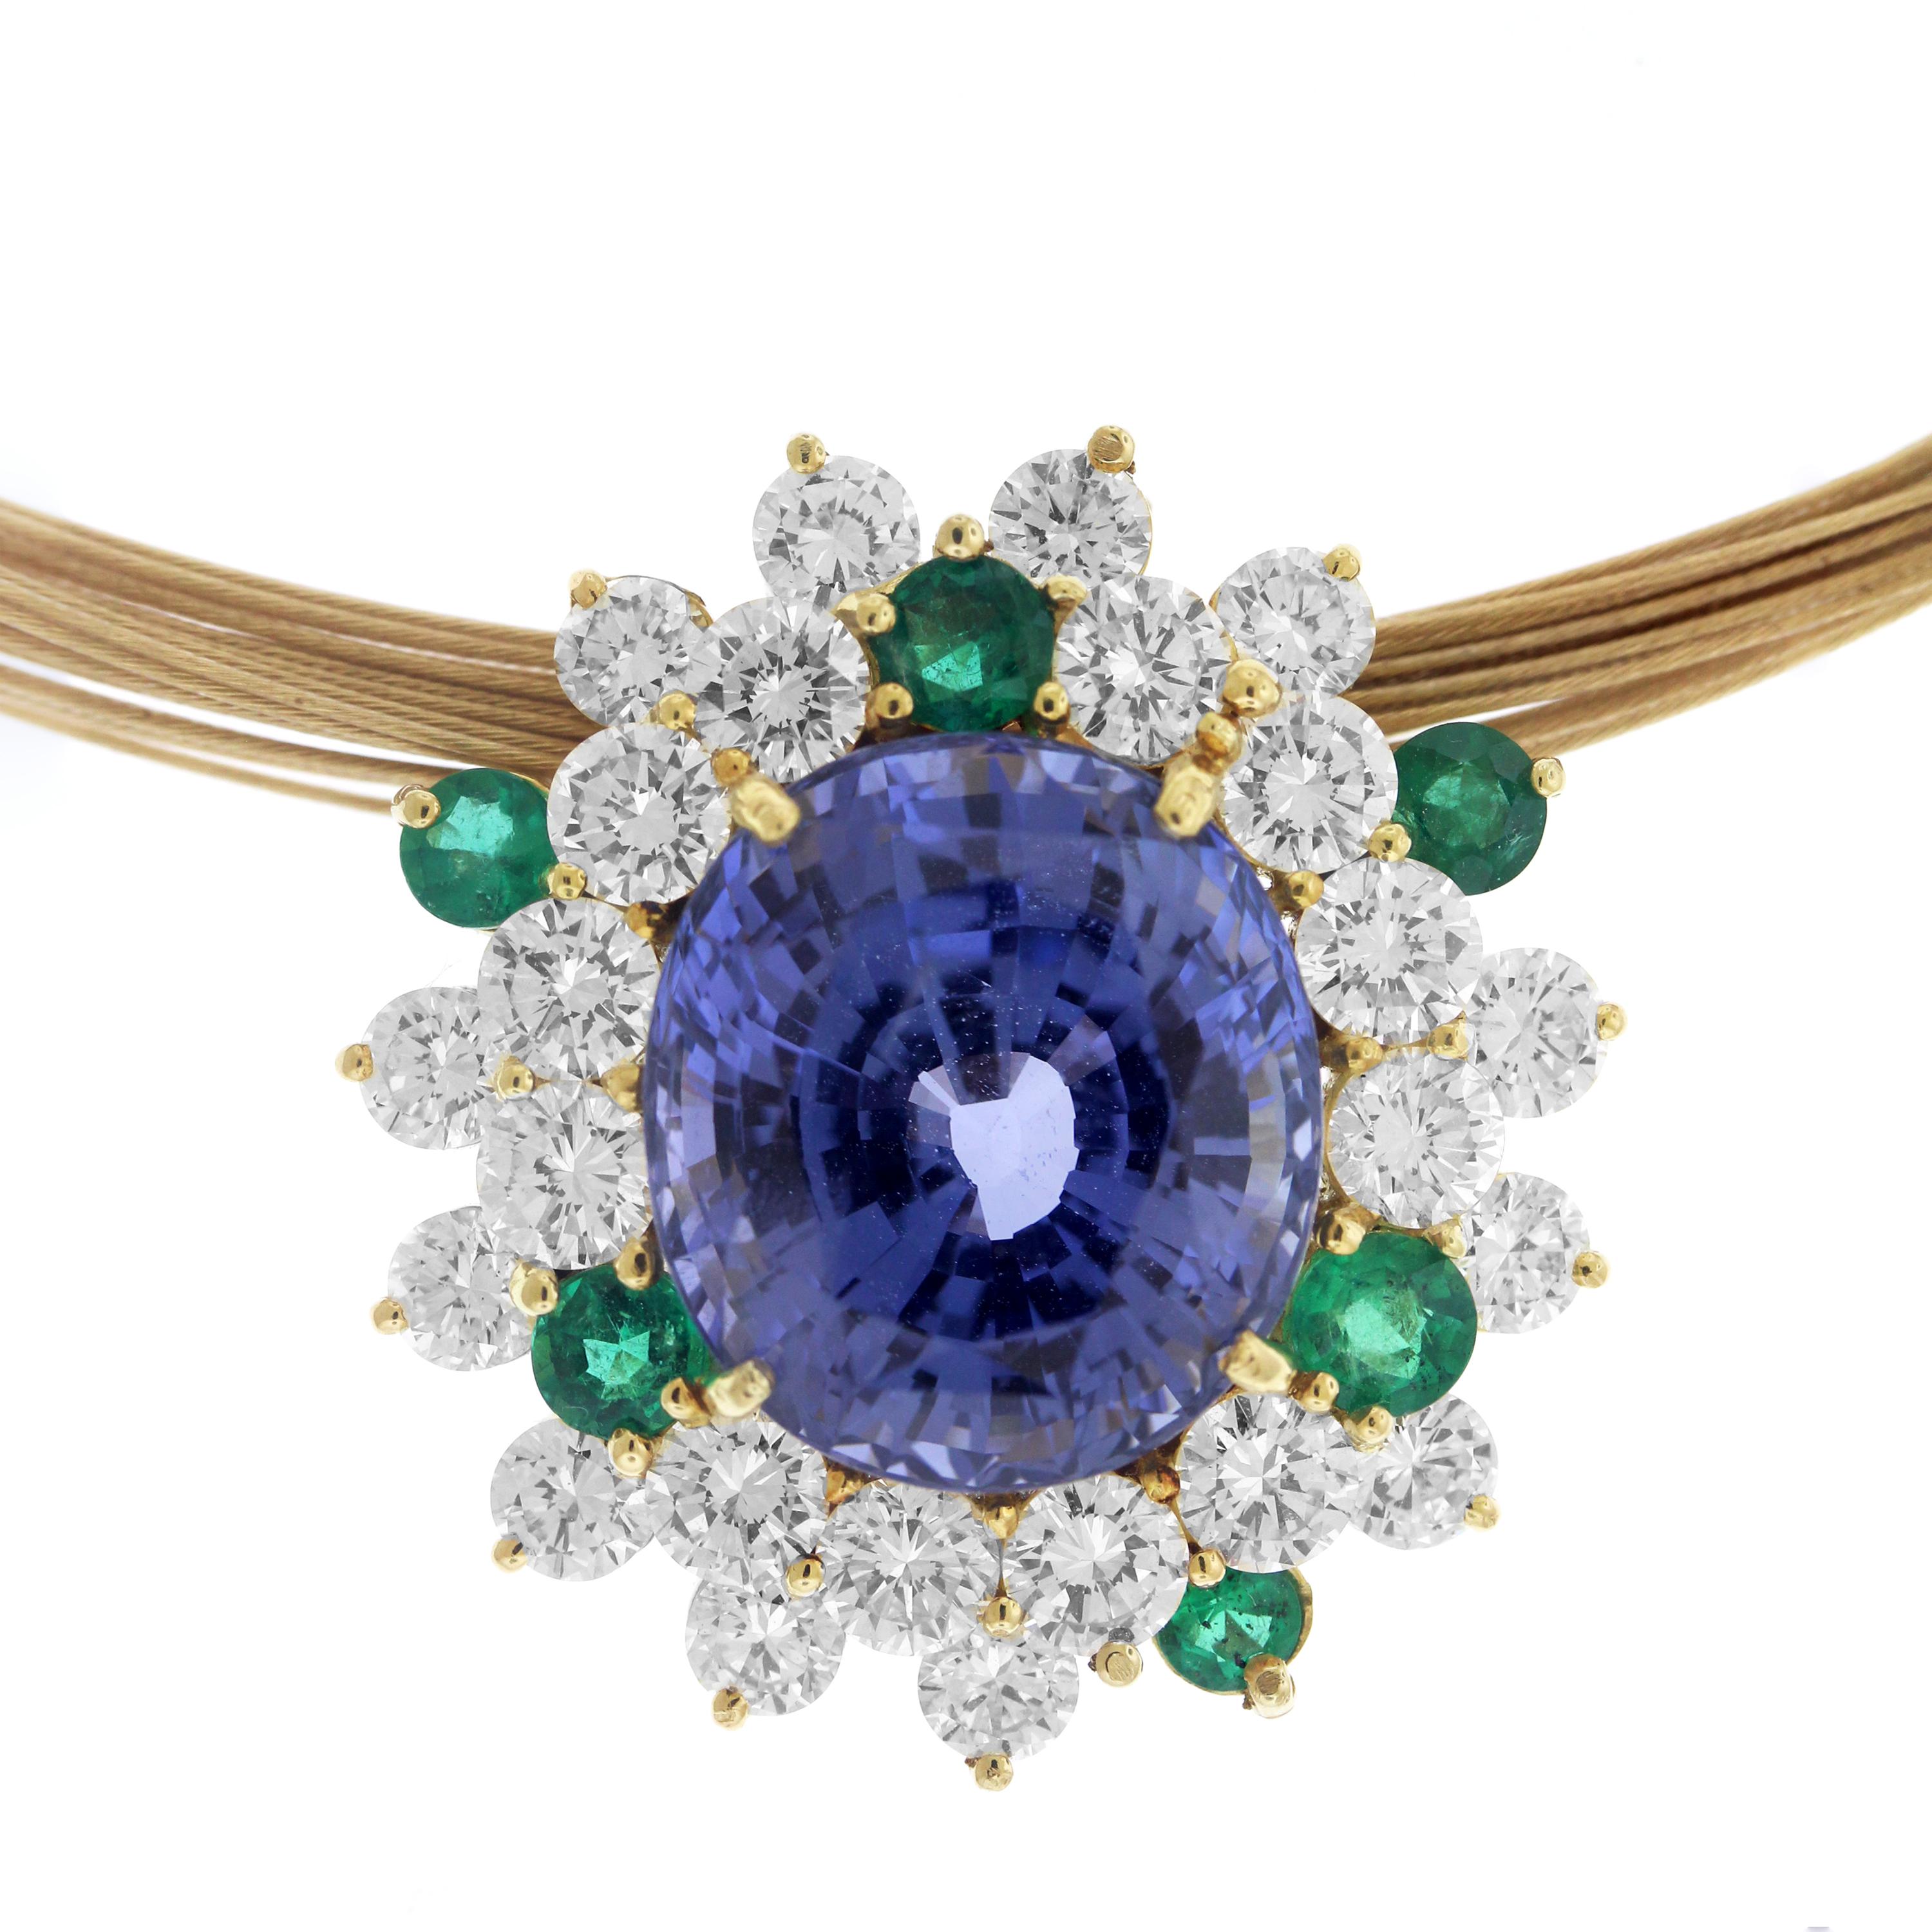 IF YOU ARE REALLY INTERESTED, CONTACT US WITH ANY REASONABLE OFFER. WE WILL TRY OUR BEST TO MAKE YOU HAPPY!

18K Yellow Gold and White Diamond Pendant Multi-Strand Necklace with Green and Oval Cut Blue Sapphire

23.26 carat Violet-Blue Oval Cut